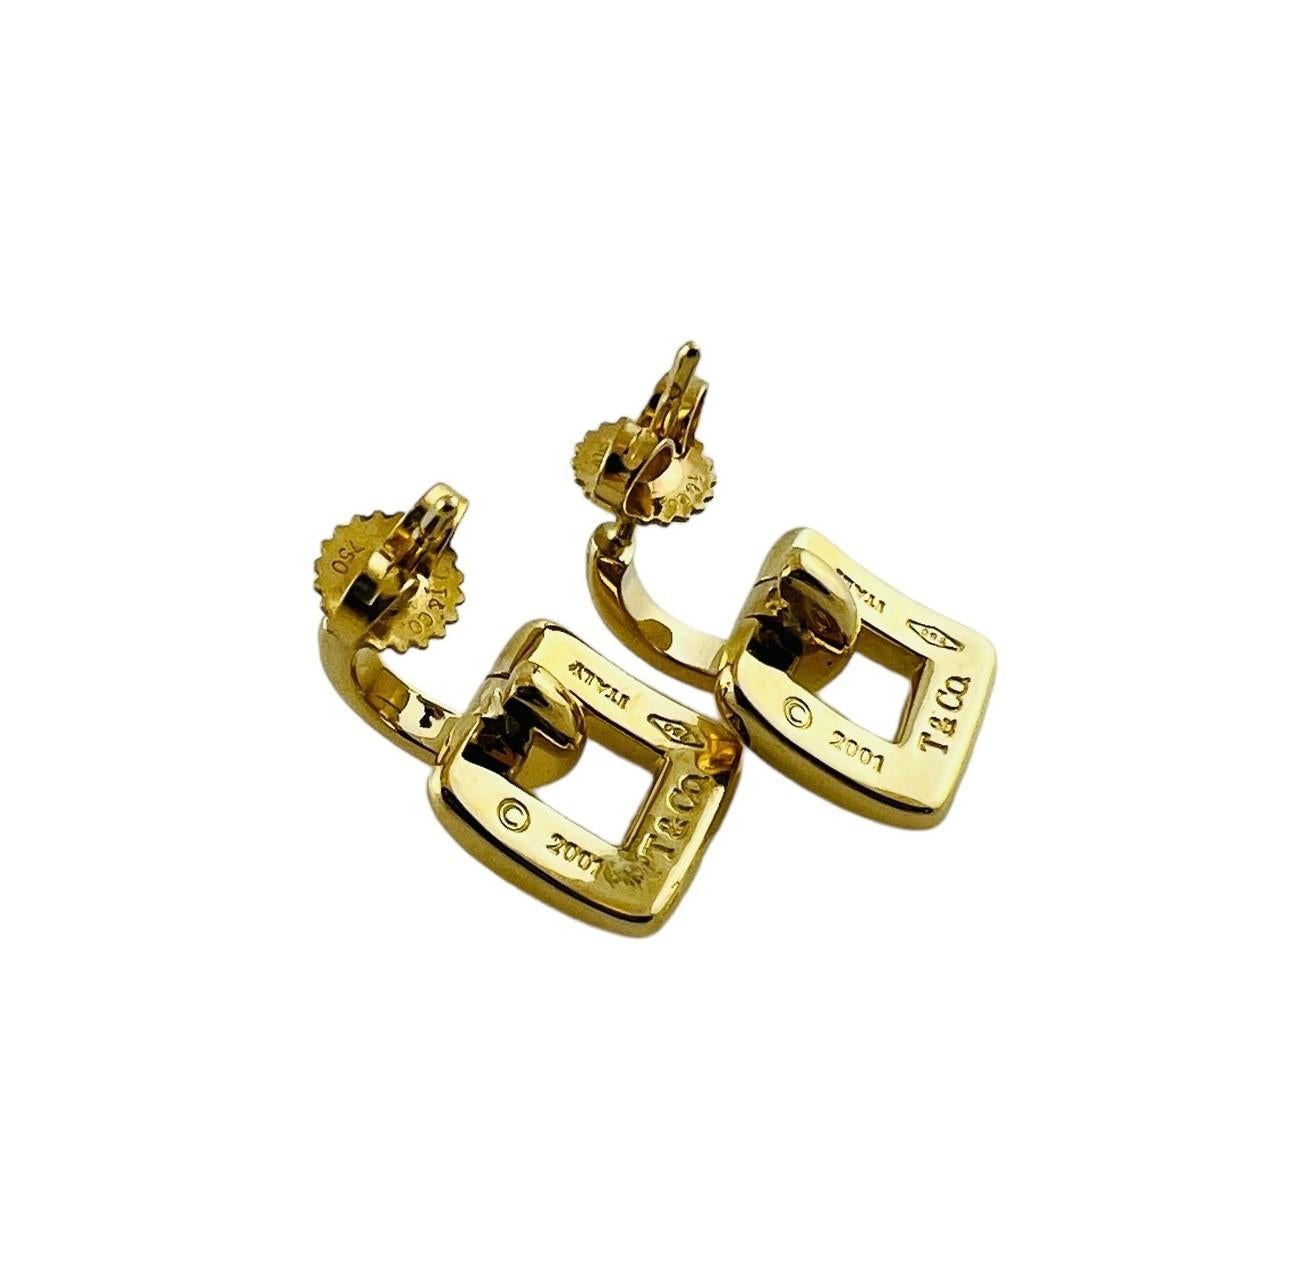 2001 Tiffany & Co. 18K Yellow Gold Door Knocker Square Buckle Earrings #16678 In Excellent Condition For Sale In Washington Depot, CT